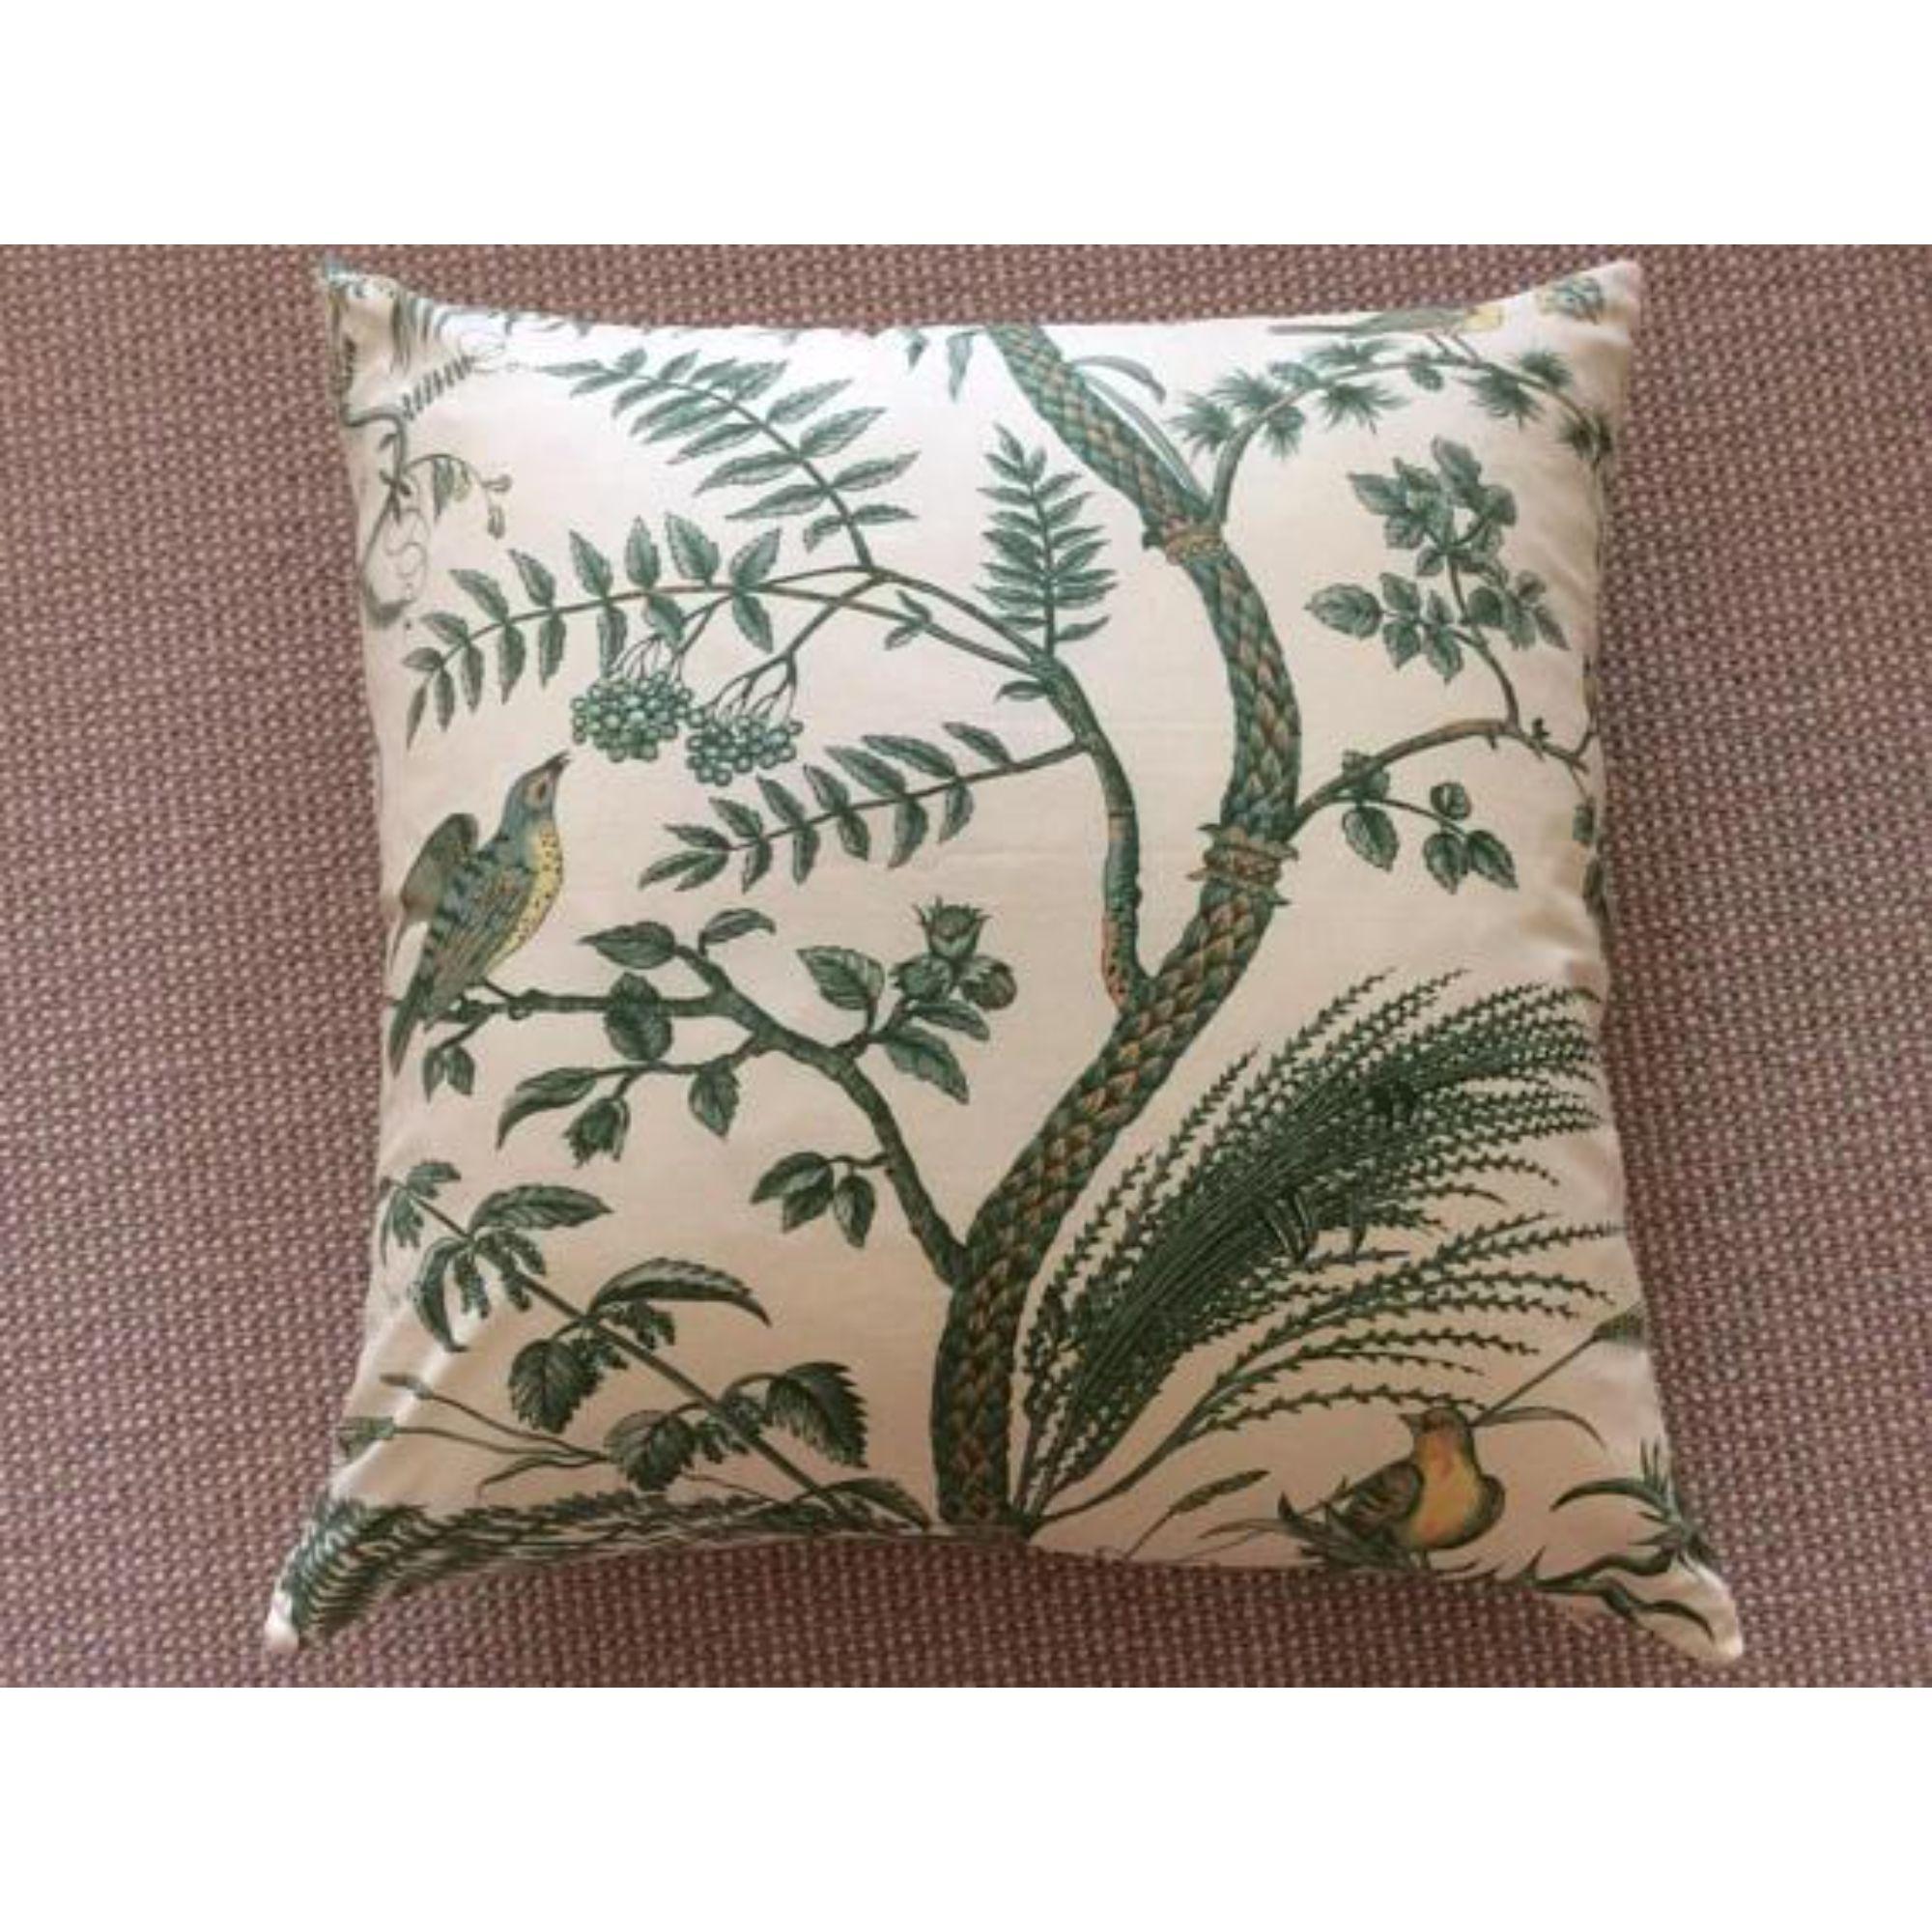 American Brunschwig & Fils Bird and Thistle Green Pillow Covers - a Pair For Sale